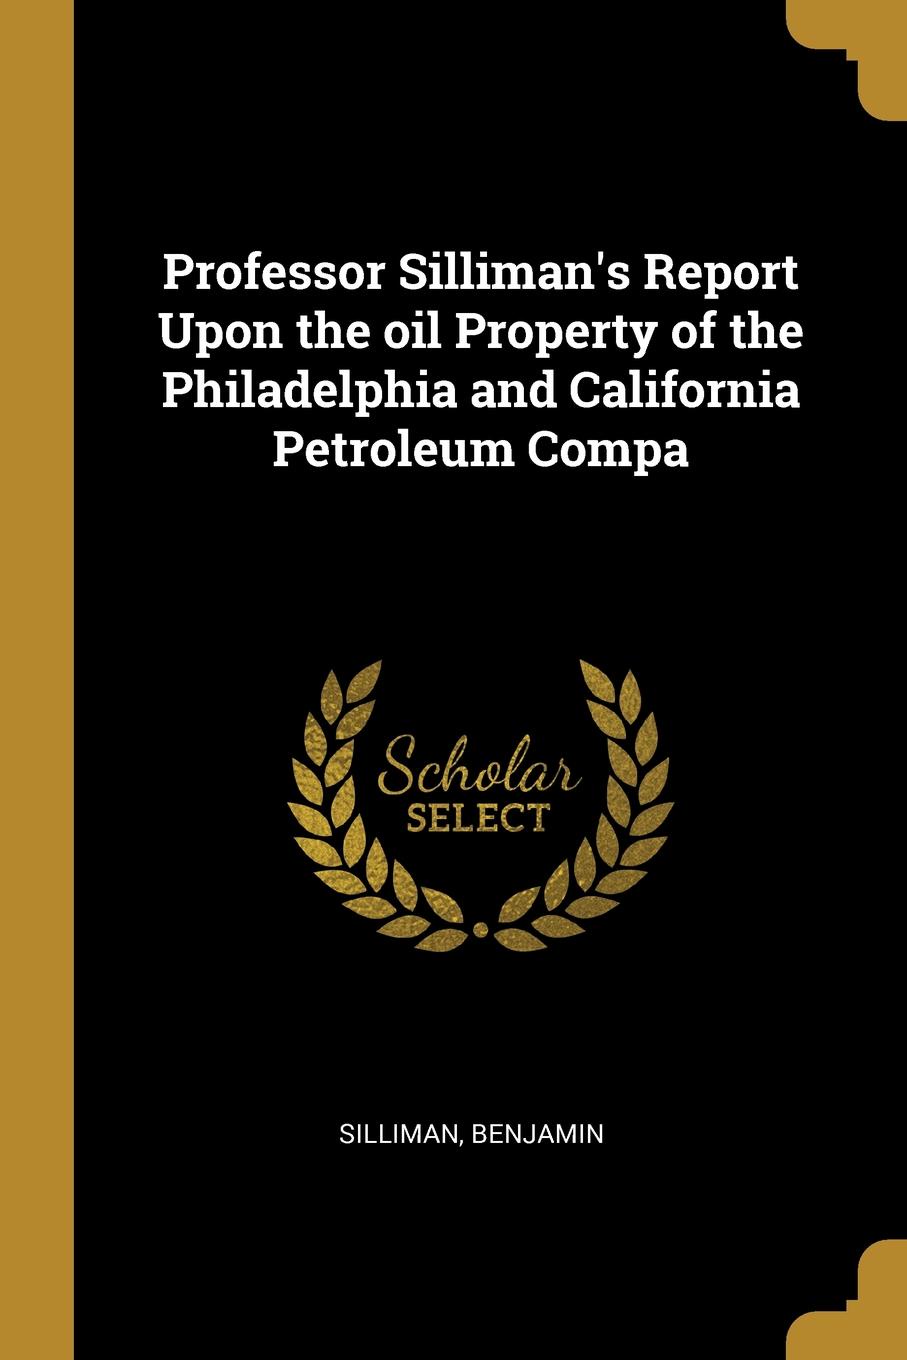 Professor Silliman.s Report Upon the oil Property of the Philadelphia and California Petroleum Compa